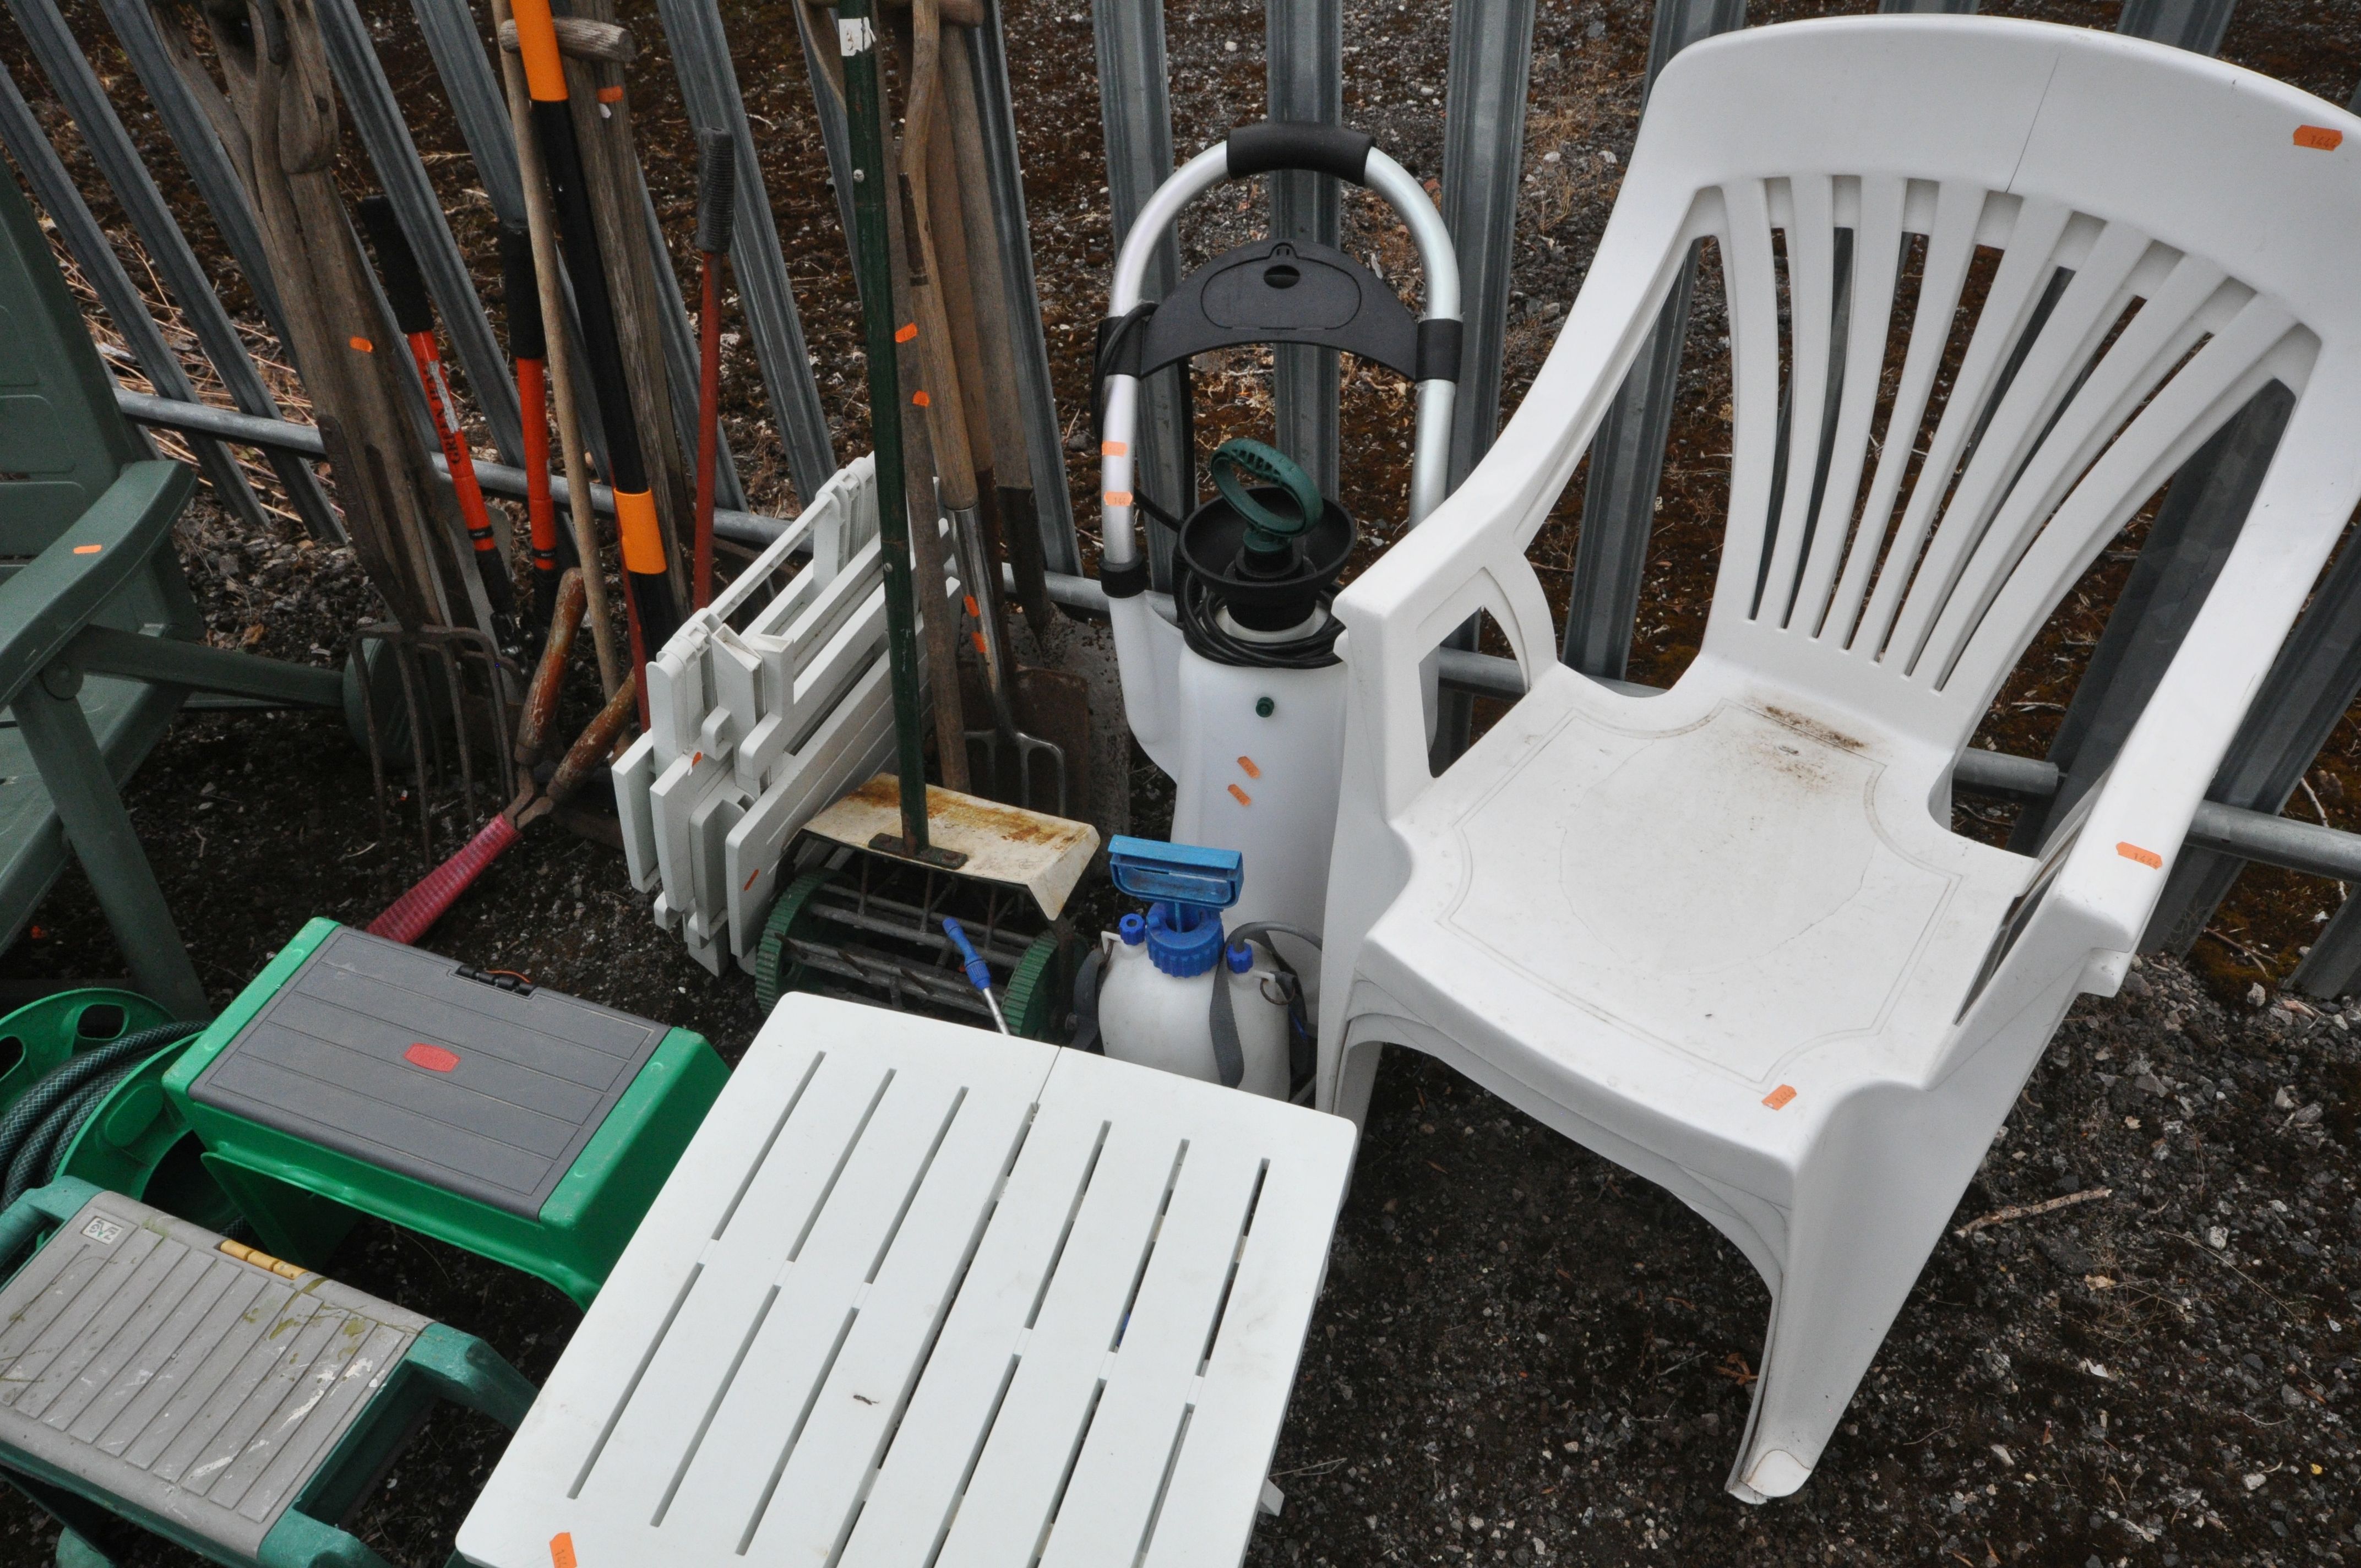 A GREEN PLASTIC GARDEN SUN LOUNGER, two white plastic garden armchairs, three folding tables, - Image 3 of 3